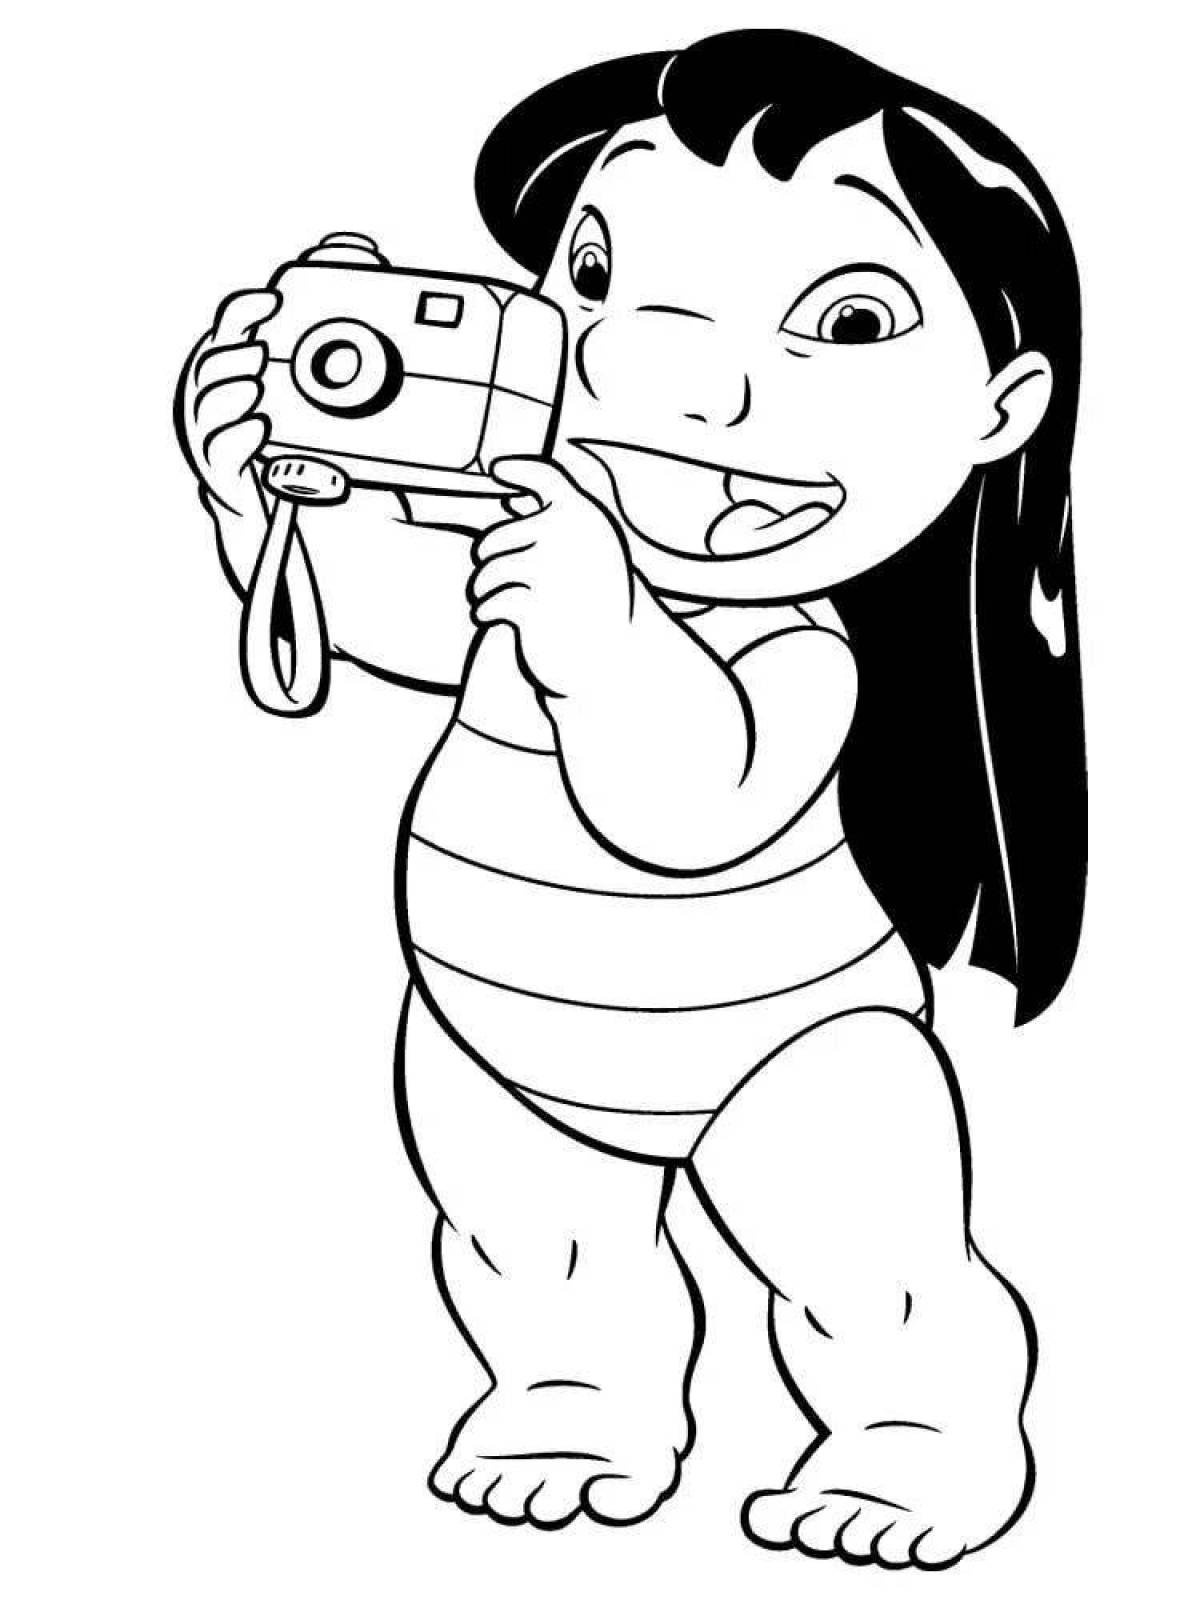 Awesome lily coloring page